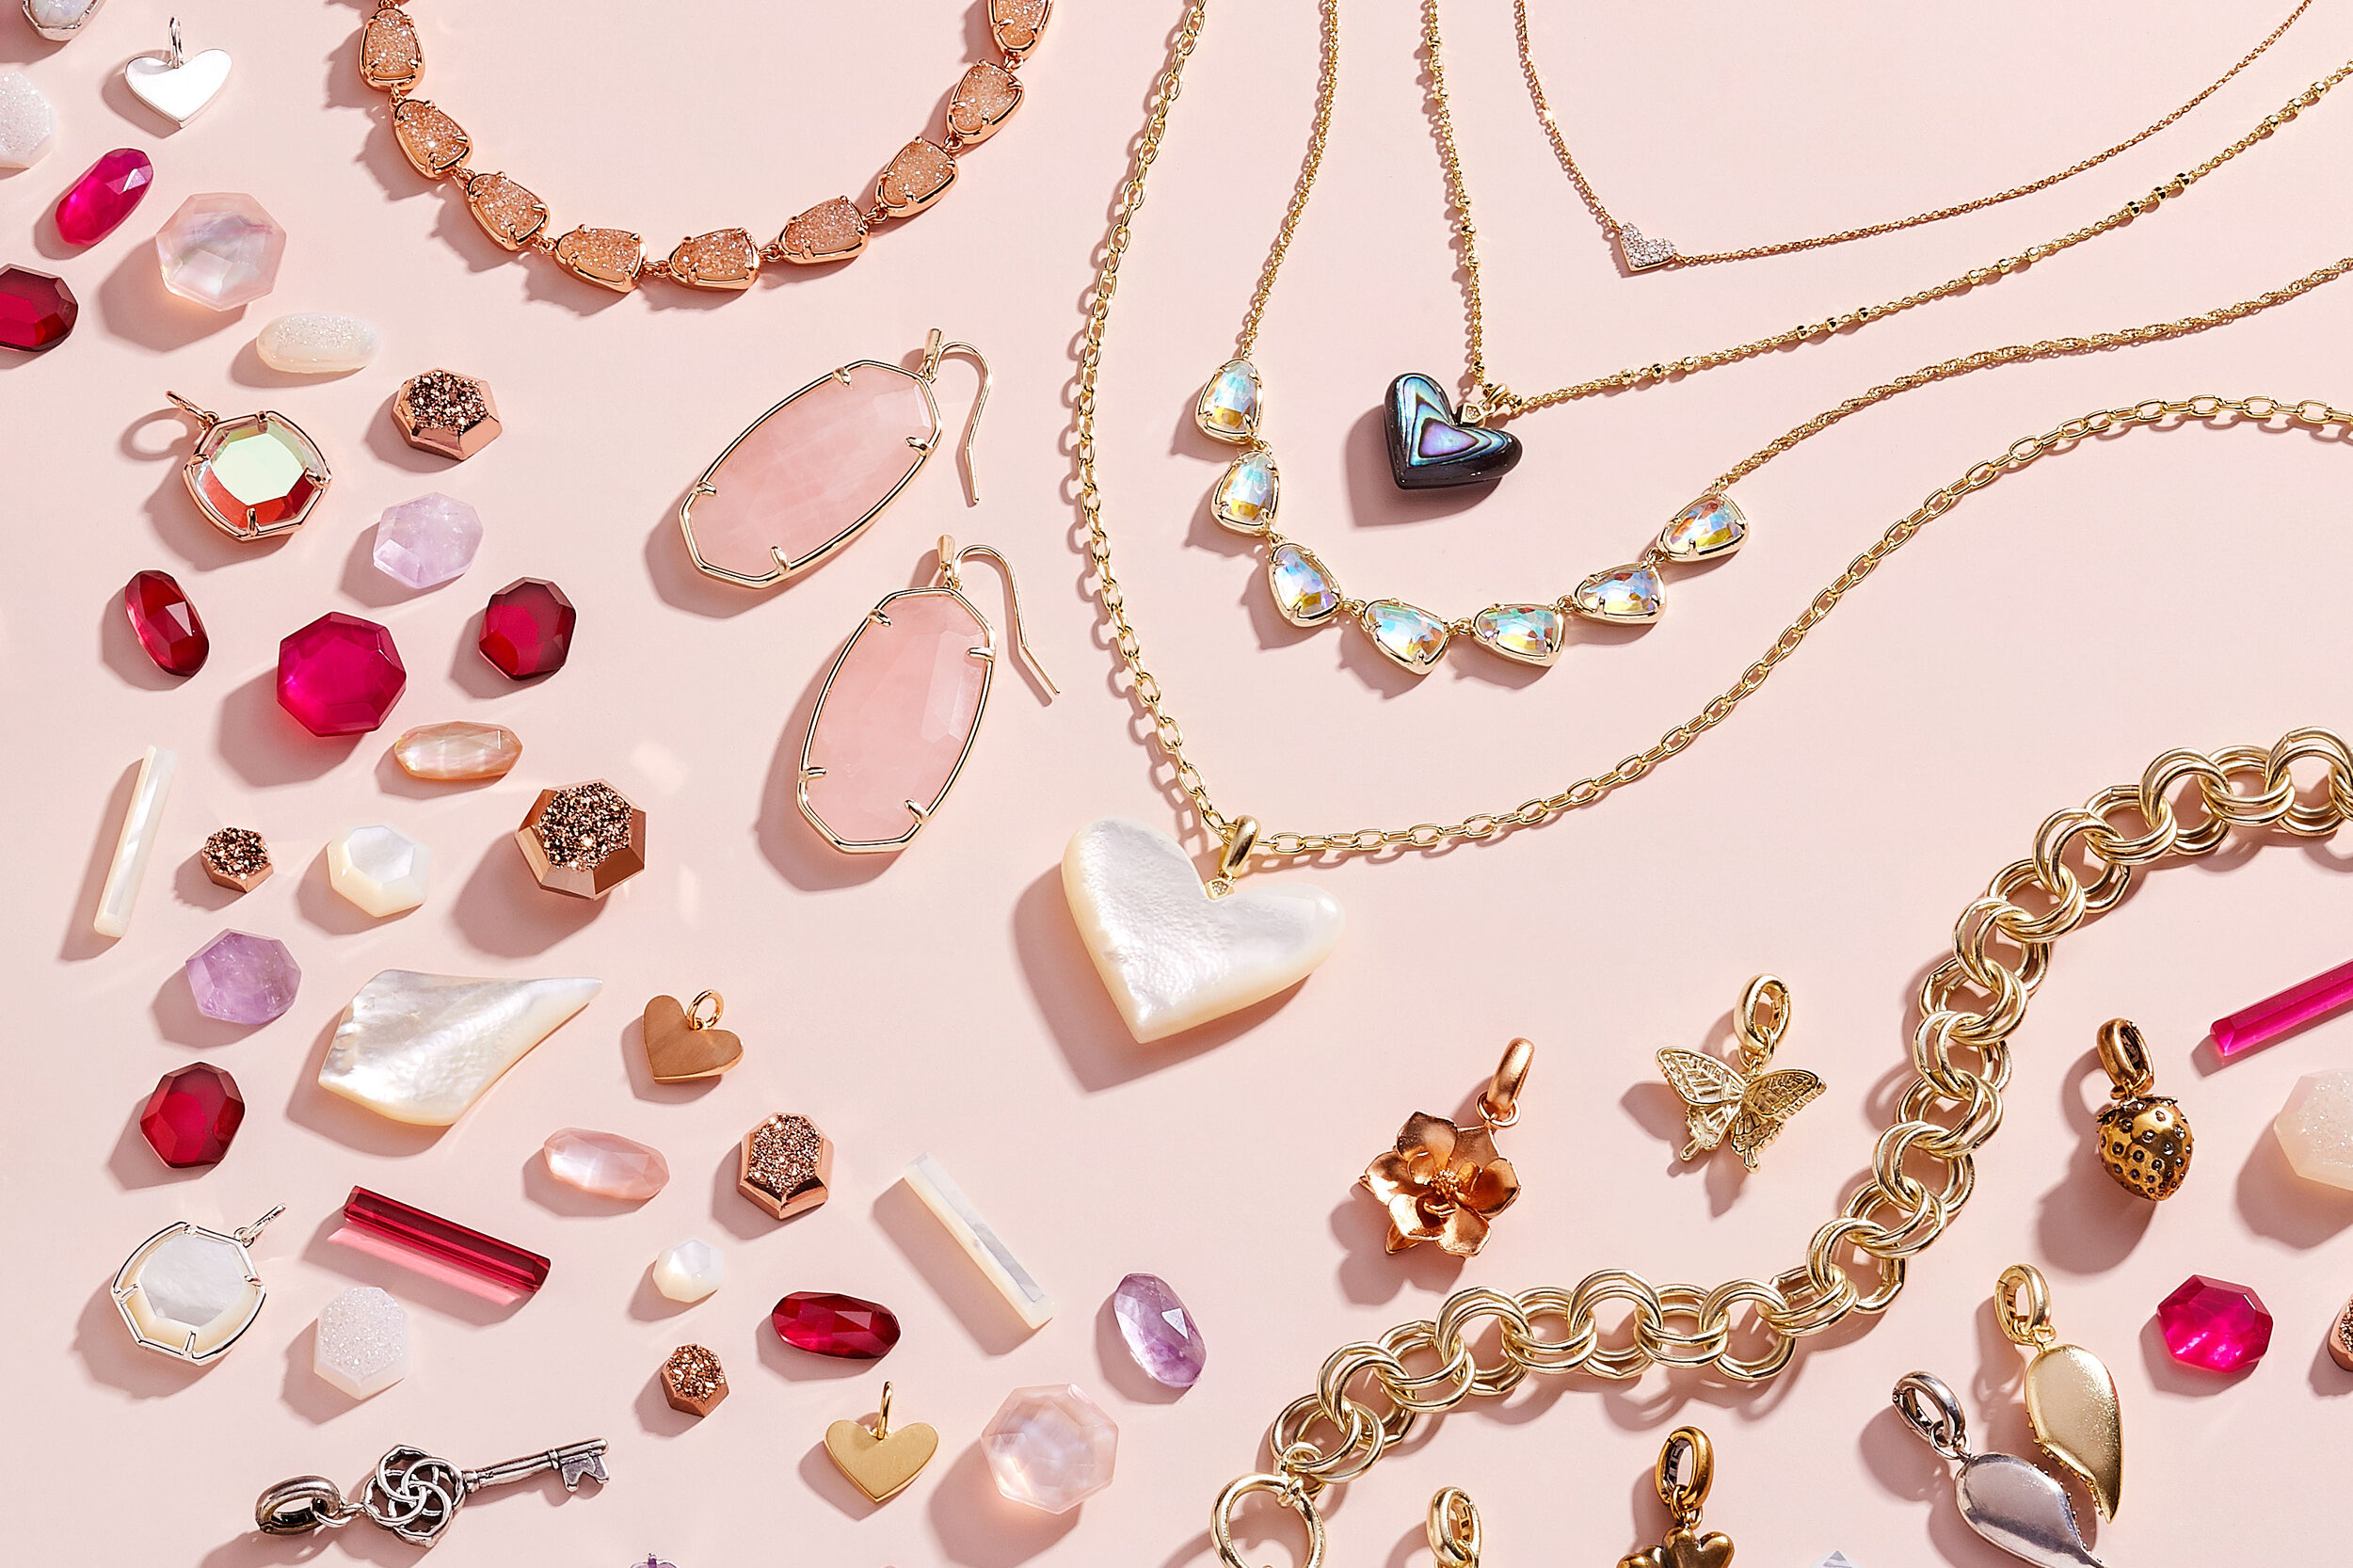 $150 Gift Ideas For Her With Jewelry On Valentine's Day